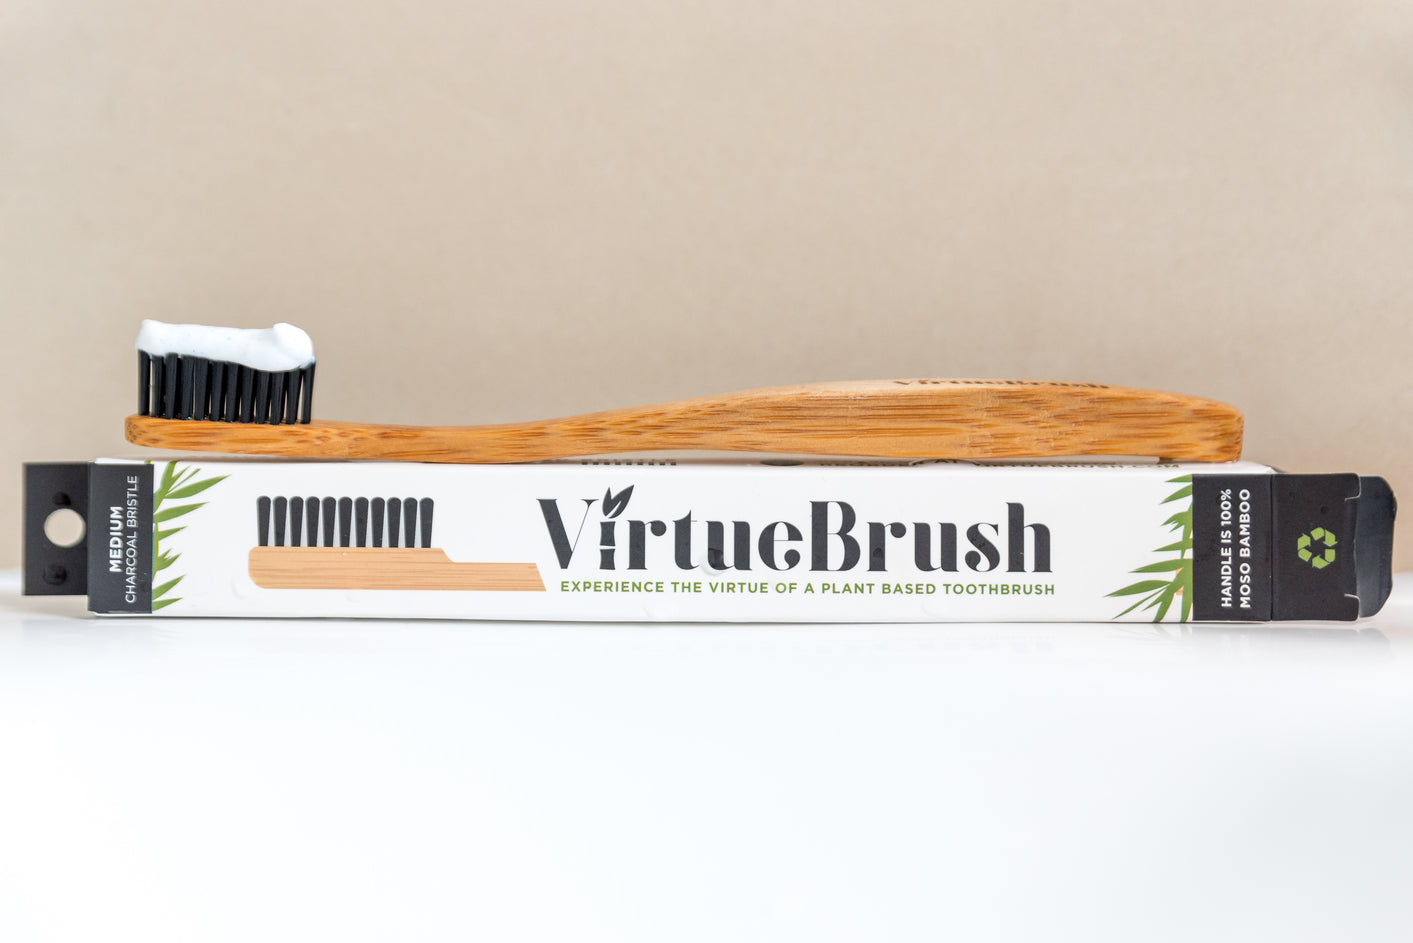 The Irish Times, 17th February 2017, Virtuous Toothbrushes, by Manchán Magan